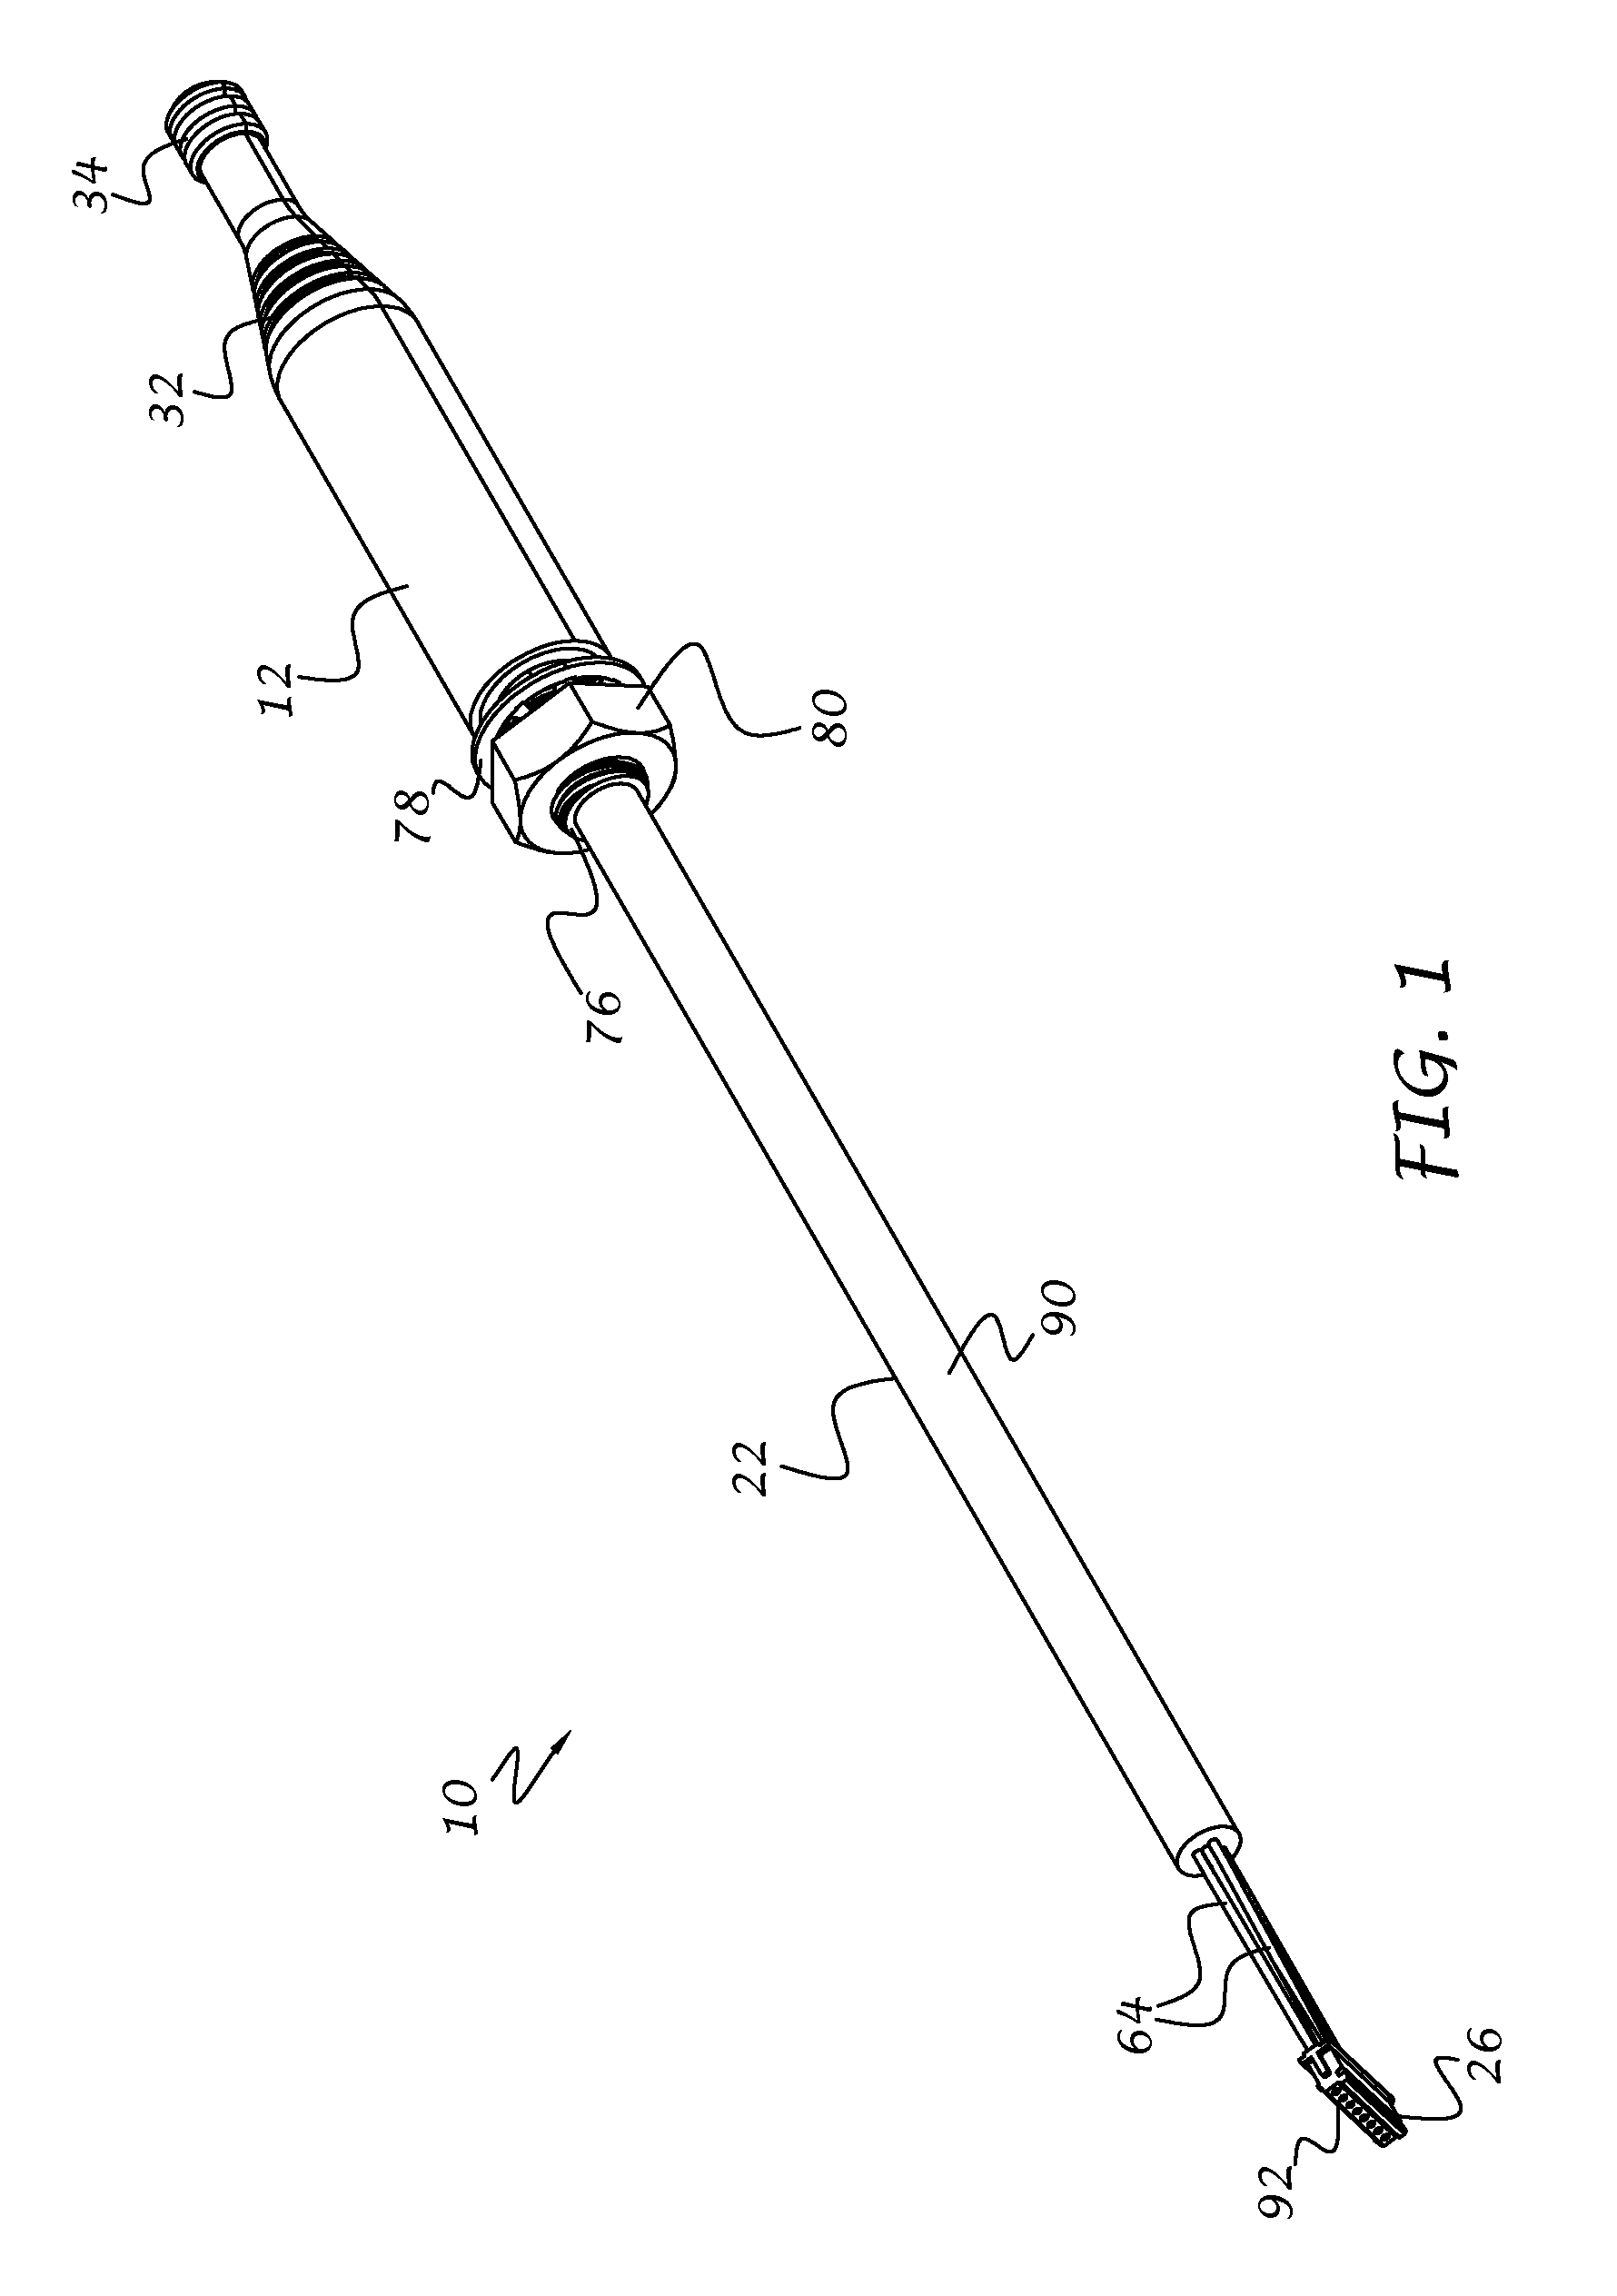 Antenna with integrated RF module